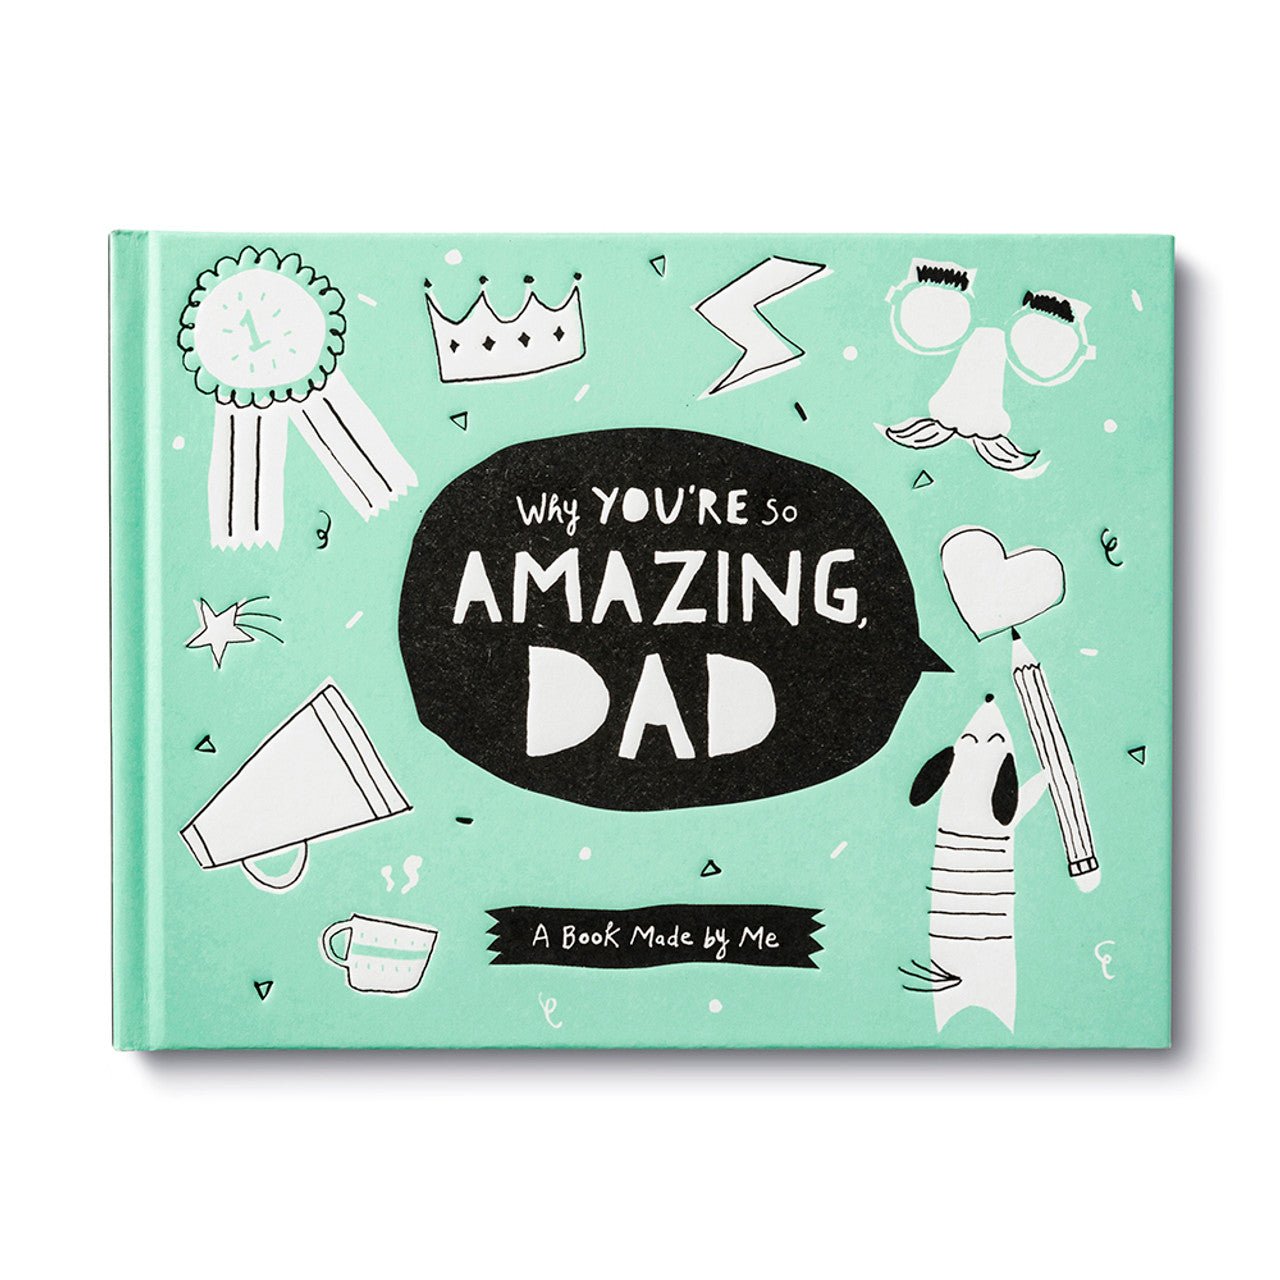 Why You're So Amazing Dad Book - Wren Harper